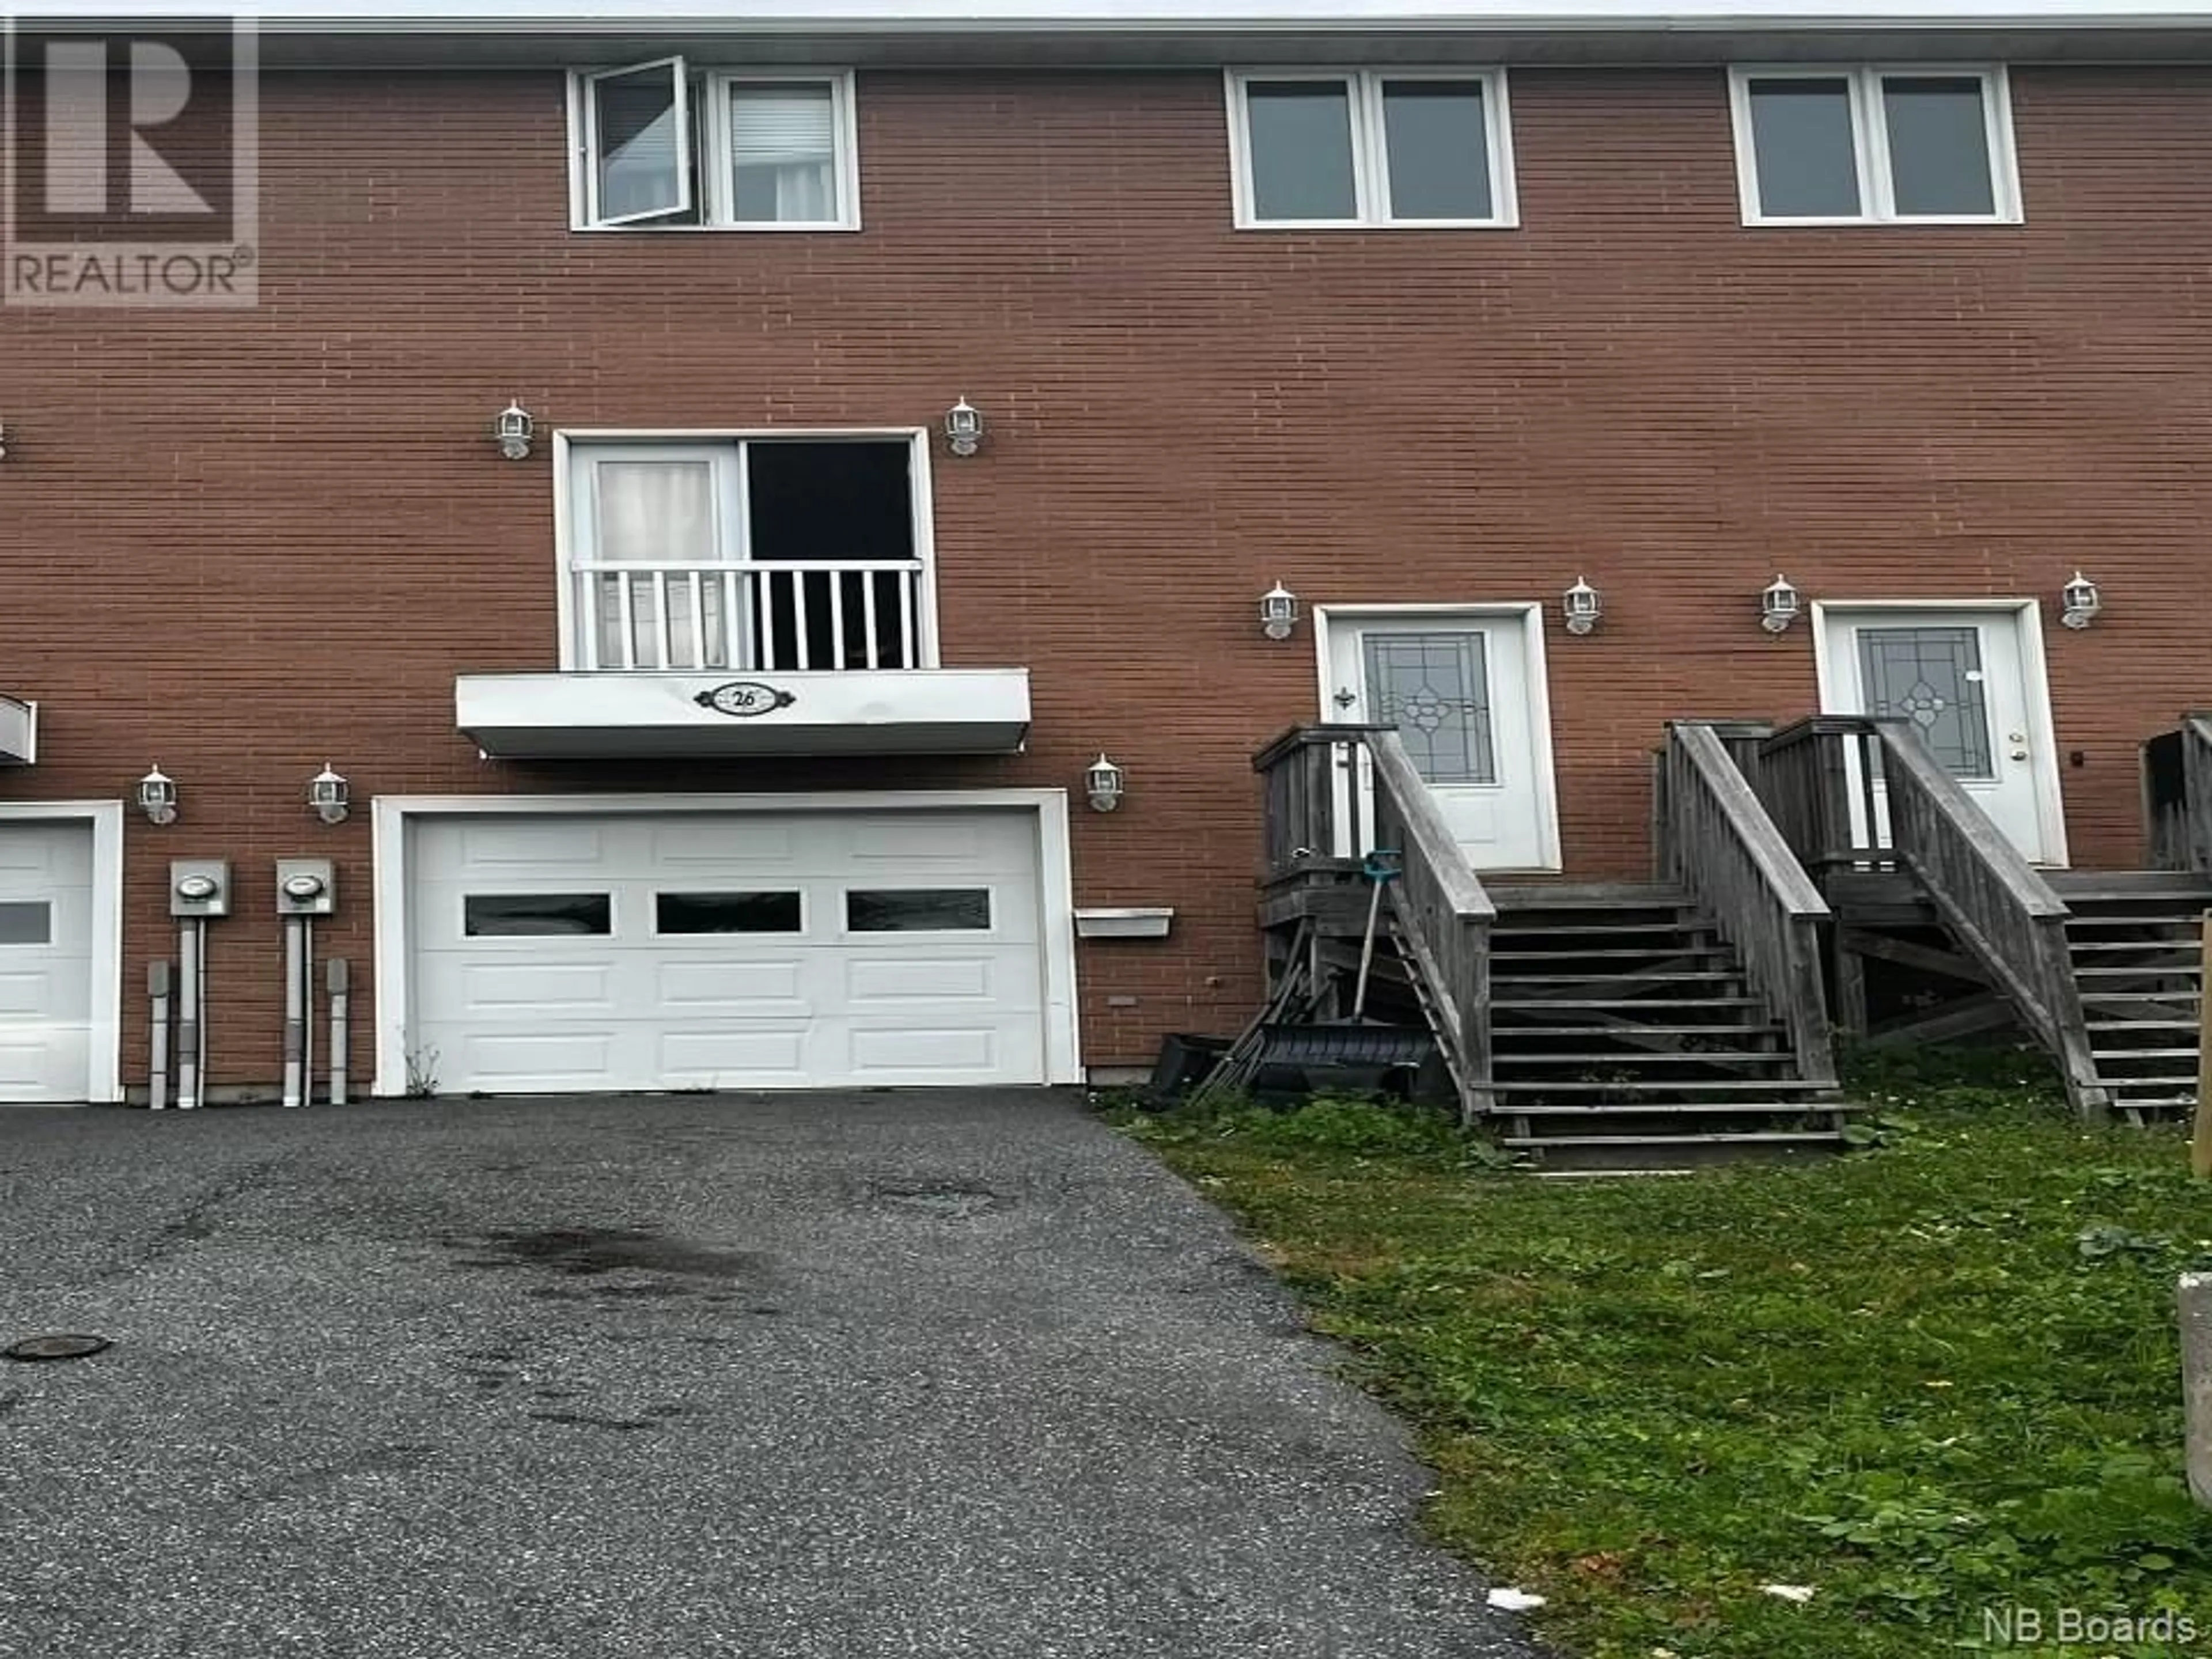 Home with unknown exterior material for 26 Pokiok Road, Saint John New Brunswick E2K1P5